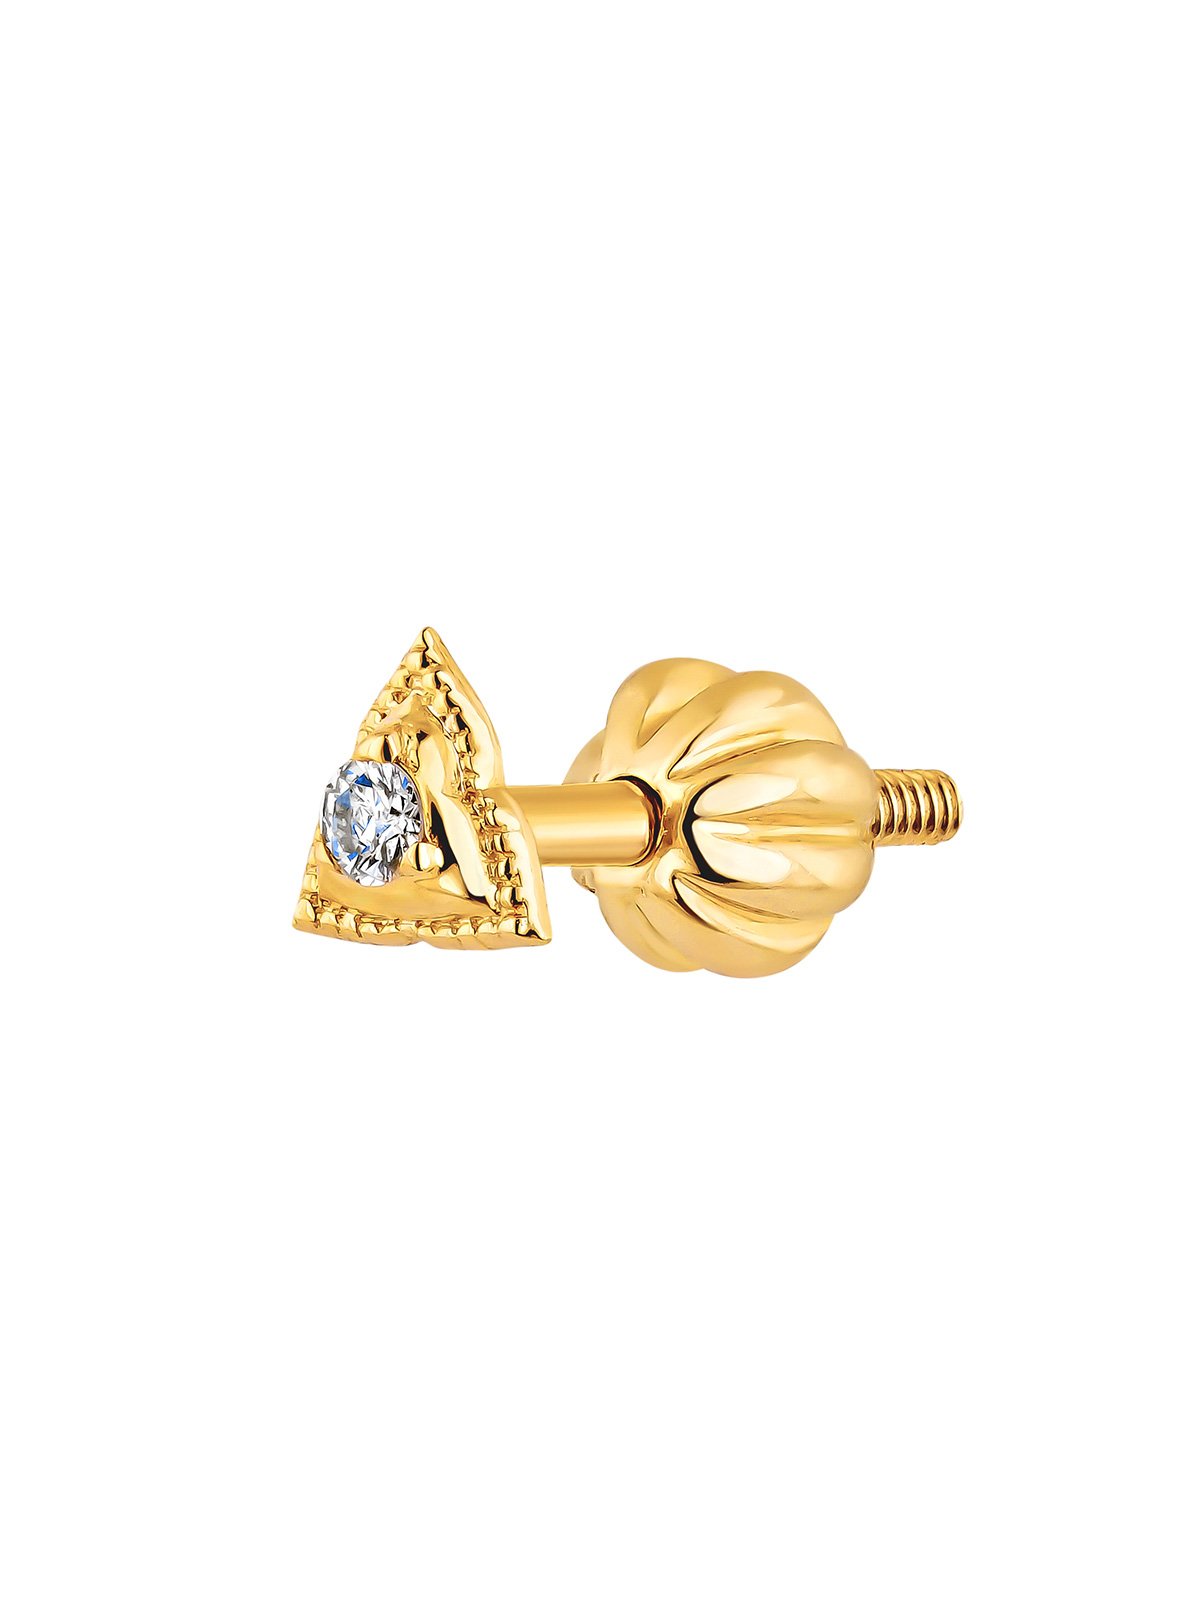 Individual 9K yellow gold earring with diamond in a triangle shape.